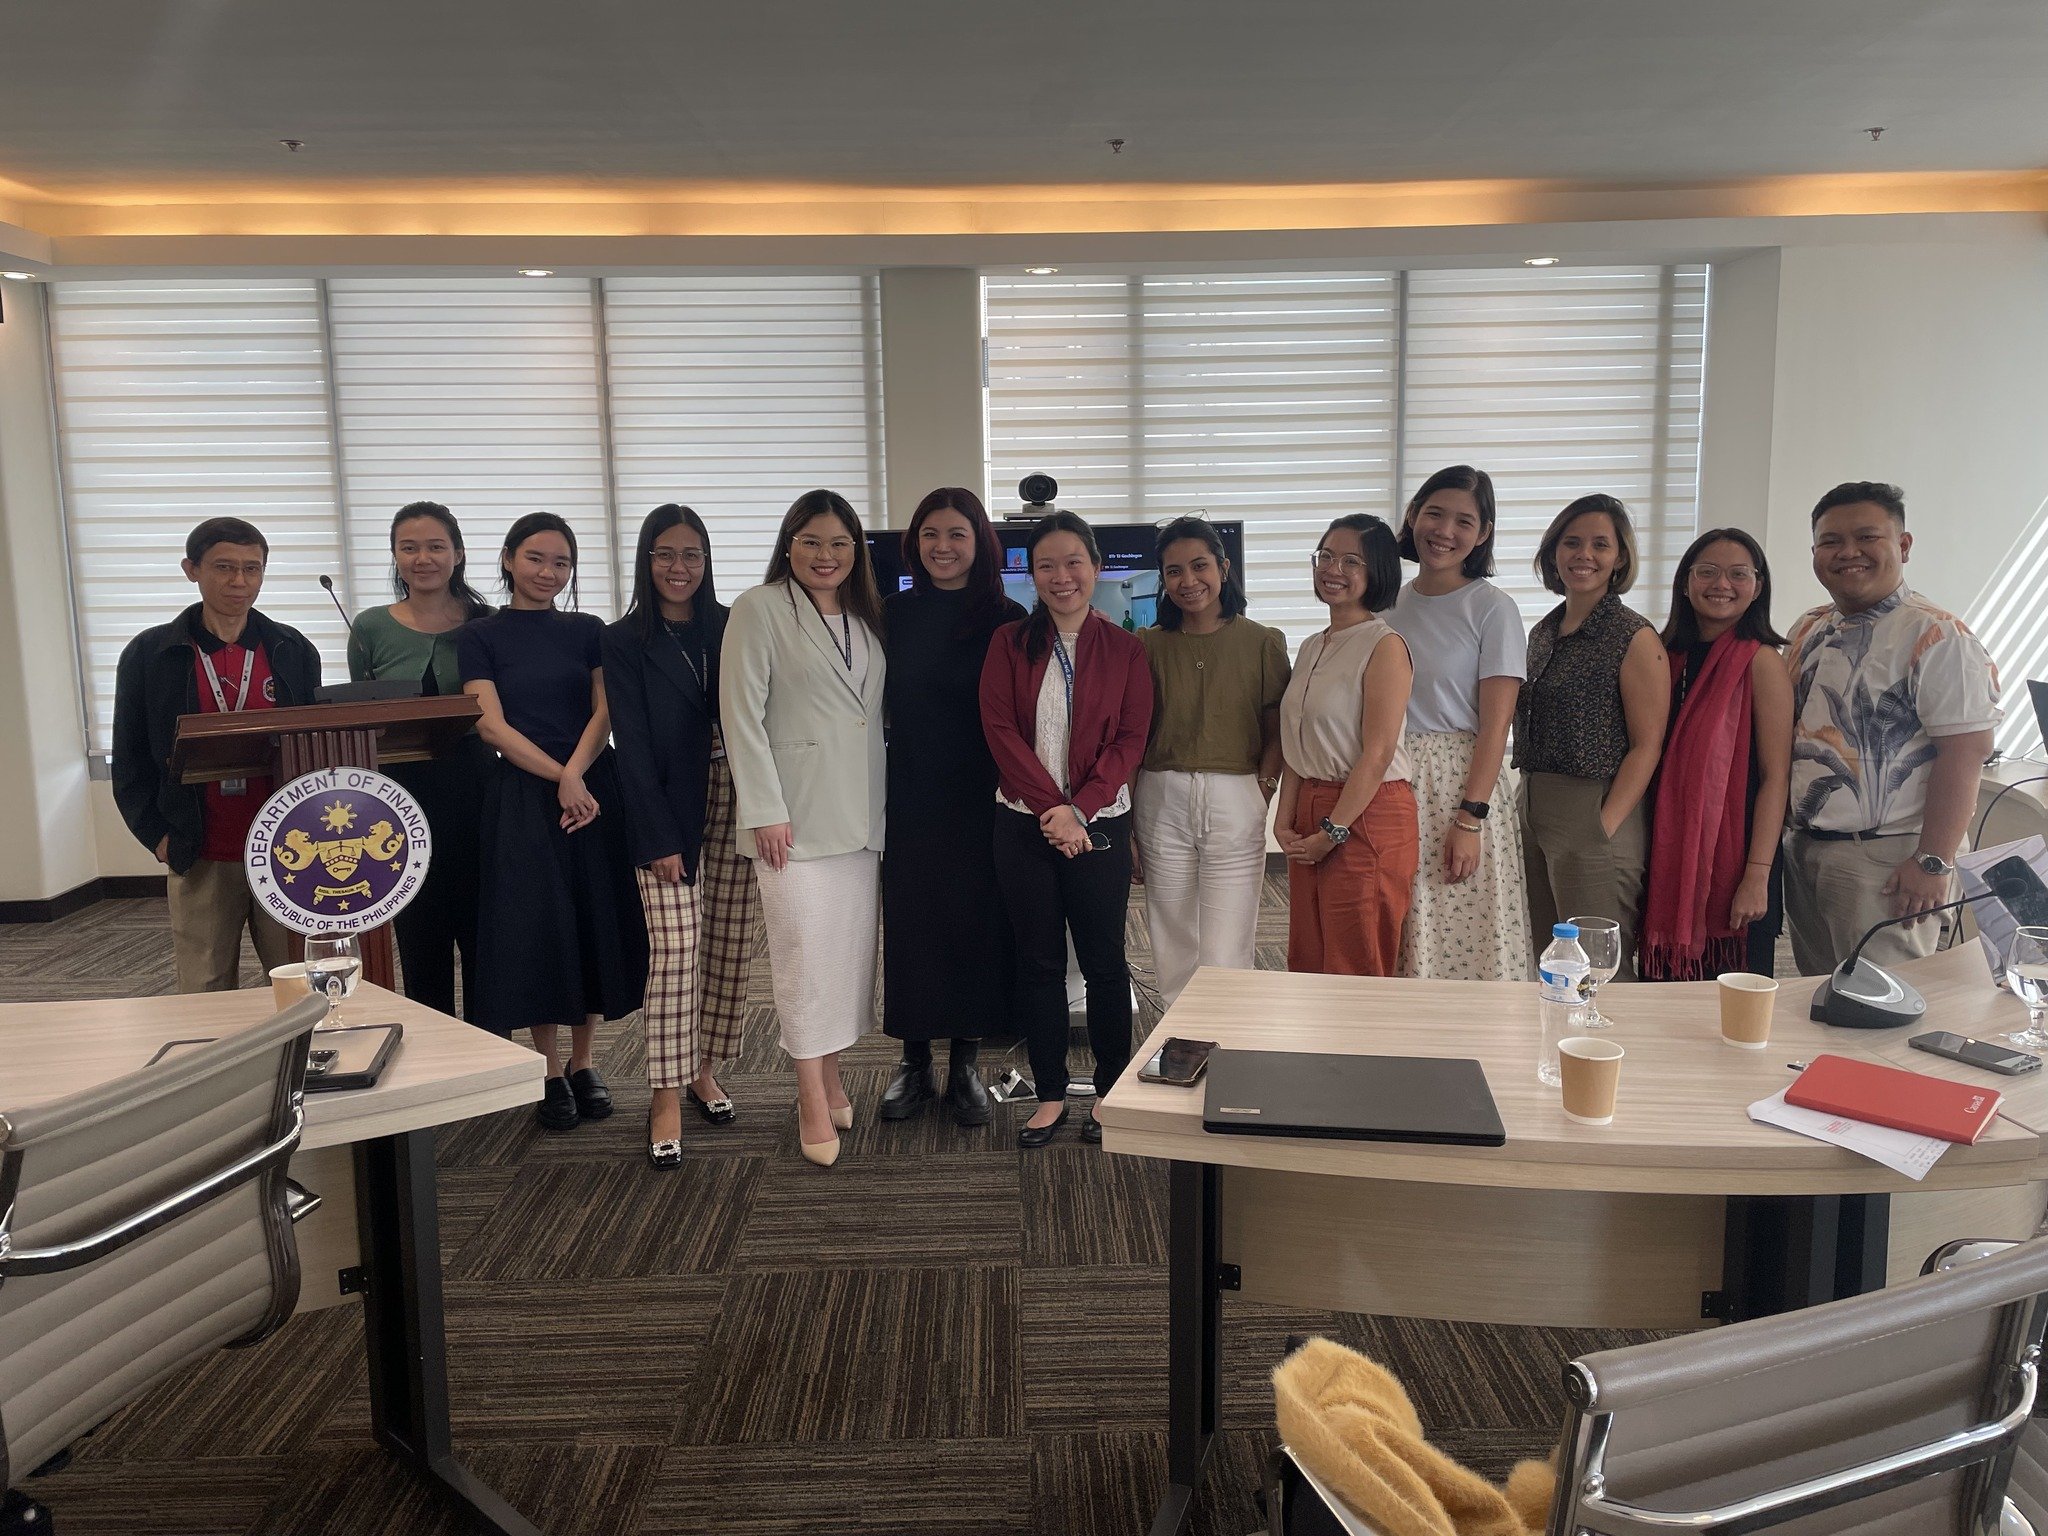 We would like to extend our deepest appreciation to the Department of Finance Climate Finance Unit for inviting us to conduct today's One-Day Intensive Learning Workshop on the United Nations Framework Convention on Climate Change (UNFCCC) and Climat